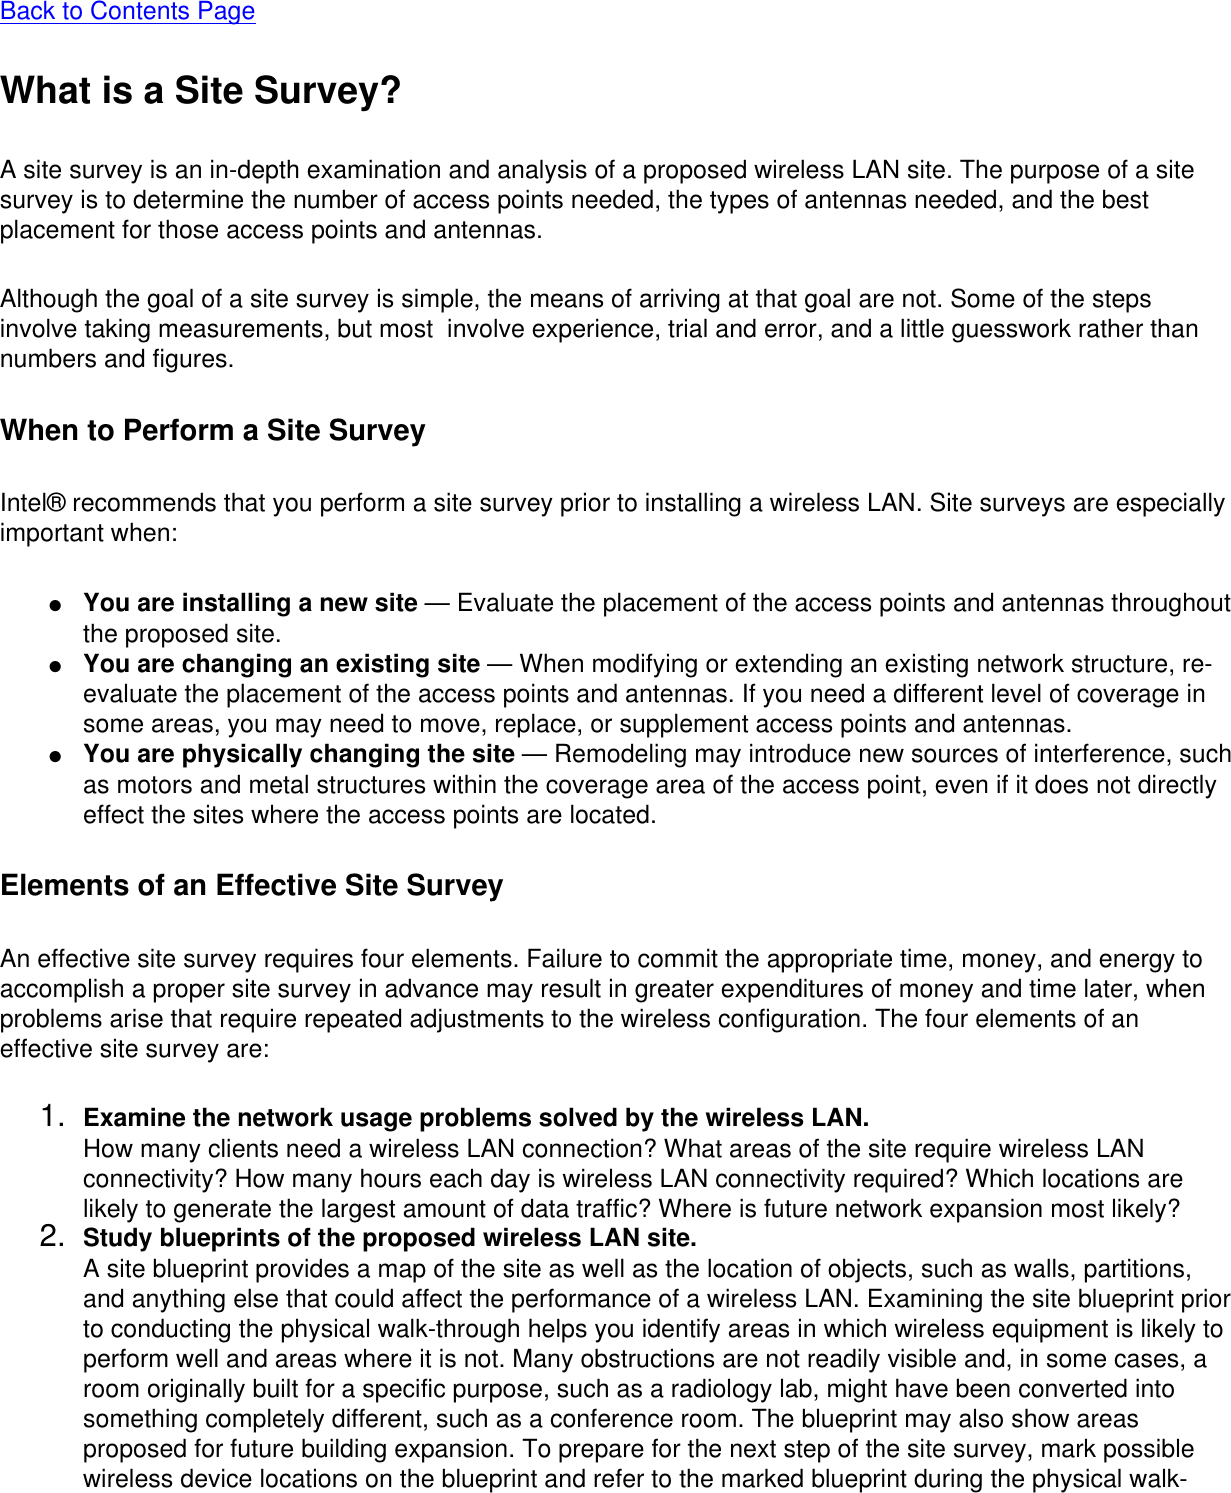 Back to Contents PageWhat is a Site Survey?A site survey is an in-depth examination and analysis of a proposed wireless LAN site. The purpose of a site survey is to determine the number of access points needed, the types of antennas needed, and the best placement for those access points and antennas. Although the goal of a site survey is simple, the means of arriving at that goal are not. Some of the steps involve taking measurements, but most  involve experience, trial and error, and a little guesswork rather than numbers and figures. When to Perform a Site SurveyIntel® recommends that you perform a site survey prior to installing a wireless LAN. Site surveys are especially important when: ●     You are installing a new site — Evaluate the placement of the access points and antennas throughout the proposed site.●     You are changing an existing site — When modifying or extending an existing network structure, re-evaluate the placement of the access points and antennas. If you need a different level of coverage in some areas, you may need to move, replace, or supplement access points and antennas.●     You are physically changing the site — Remodeling may introduce new sources of interference, such as motors and metal structures within the coverage area of the access point, even if it does not directly effect the sites where the access points are located.Elements of an Effective Site SurveyAn effective site survey requires four elements. Failure to commit the appropriate time, money, and energy to accomplish a proper site survey in advance may result in greater expenditures of money and time later, when problems arise that require repeated adjustments to the wireless configuration. The four elements of an effective site survey are: 1.  Examine the network usage problems solved by the wireless LAN.How many clients need a wireless LAN connection? What areas of the site require wireless LAN connectivity? How many hours each day is wireless LAN connectivity required? Which locations are likely to generate the largest amount of data traffic? Where is future network expansion most likely?2.  Study blueprints of the proposed wireless LAN site.A site blueprint provides a map of the site as well as the location of objects, such as walls, partitions, and anything else that could affect the performance of a wireless LAN. Examining the site blueprint prior to conducting the physical walk-through helps you identify areas in which wireless equipment is likely to perform well and areas where it is not. Many obstructions are not readily visible and, in some cases, a room originally built for a specific purpose, such as a radiology lab, might have been converted into something completely different, such as a conference room. The blueprint may also show areas proposed for future building expansion. To prepare for the next step of the site survey, mark possible wireless device locations on the blueprint and refer to the marked blueprint during the physical walk-